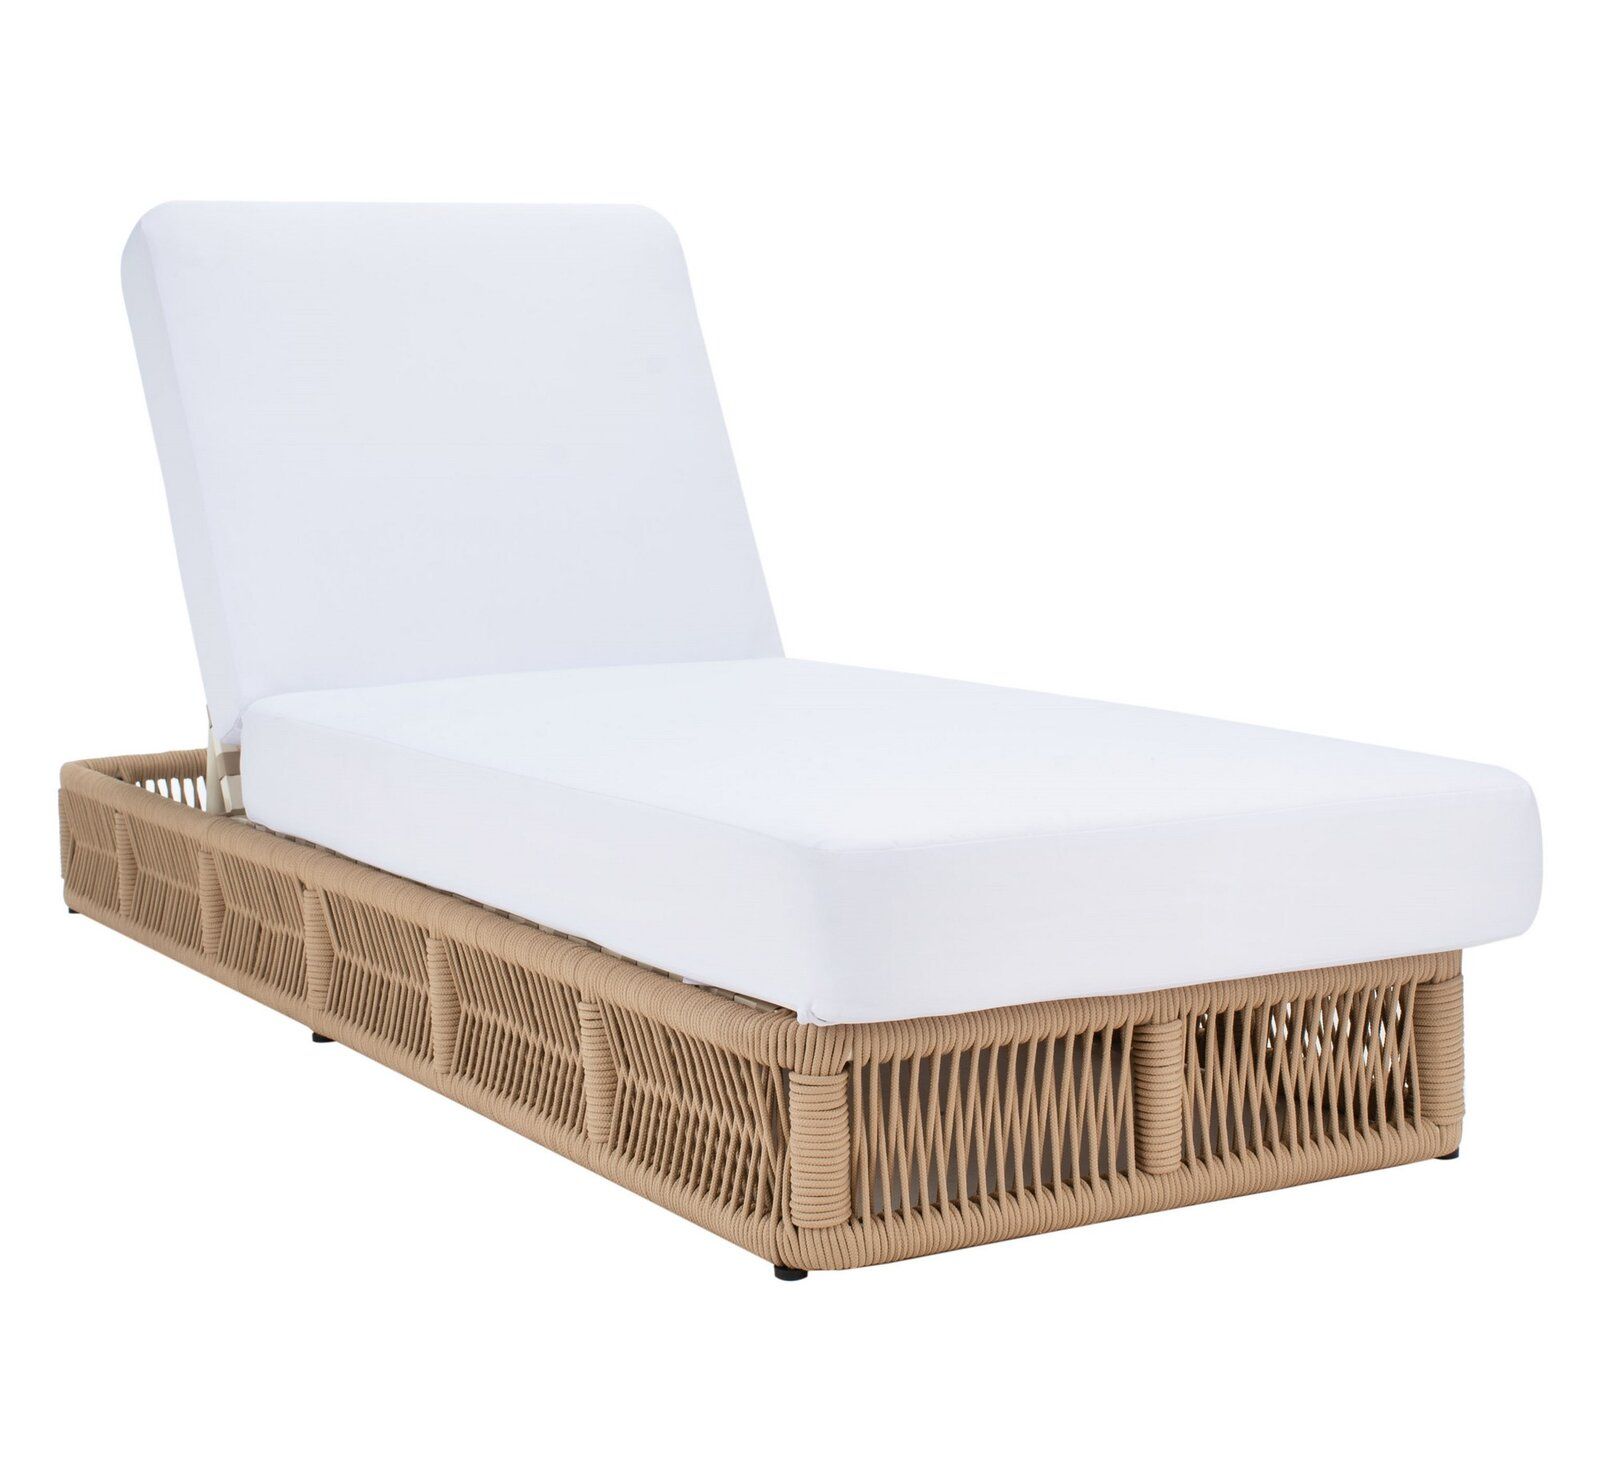 Langley Reclining Single Chaise